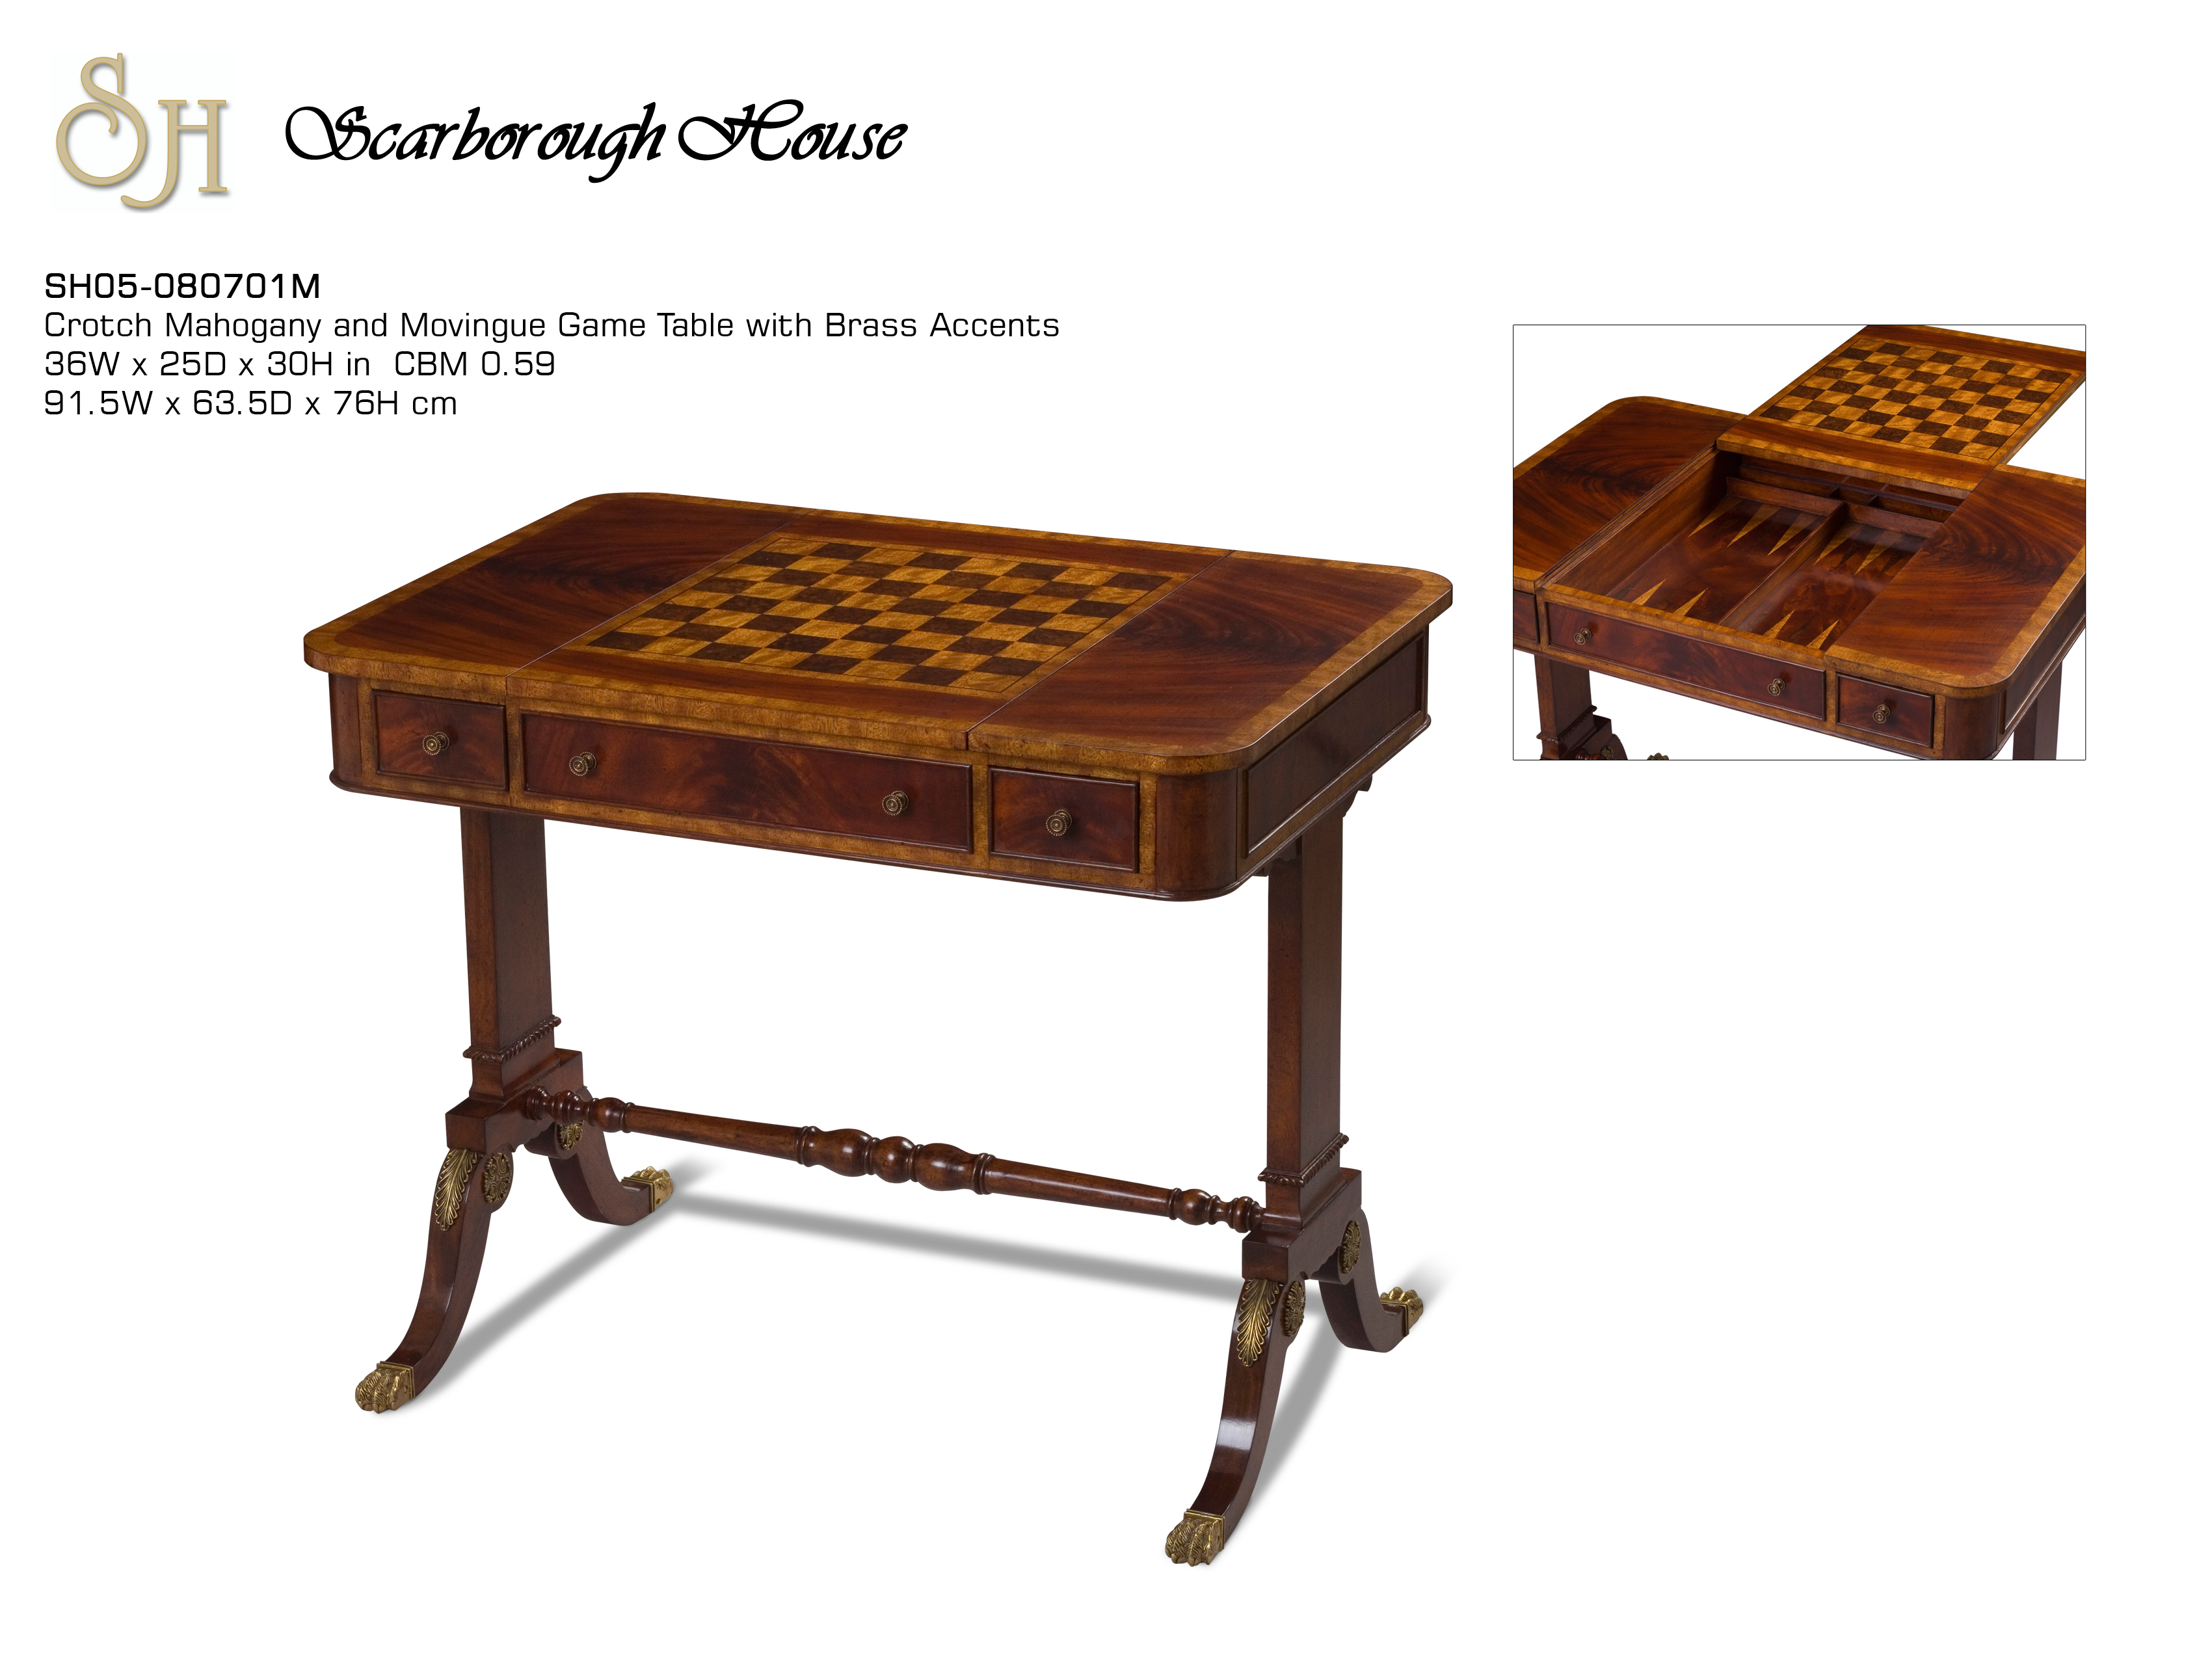 game table scarborough house accent click here for printable vale furniture hallway chest drawers large antique dining room small metal bedside lift coffee tablecloth inch round